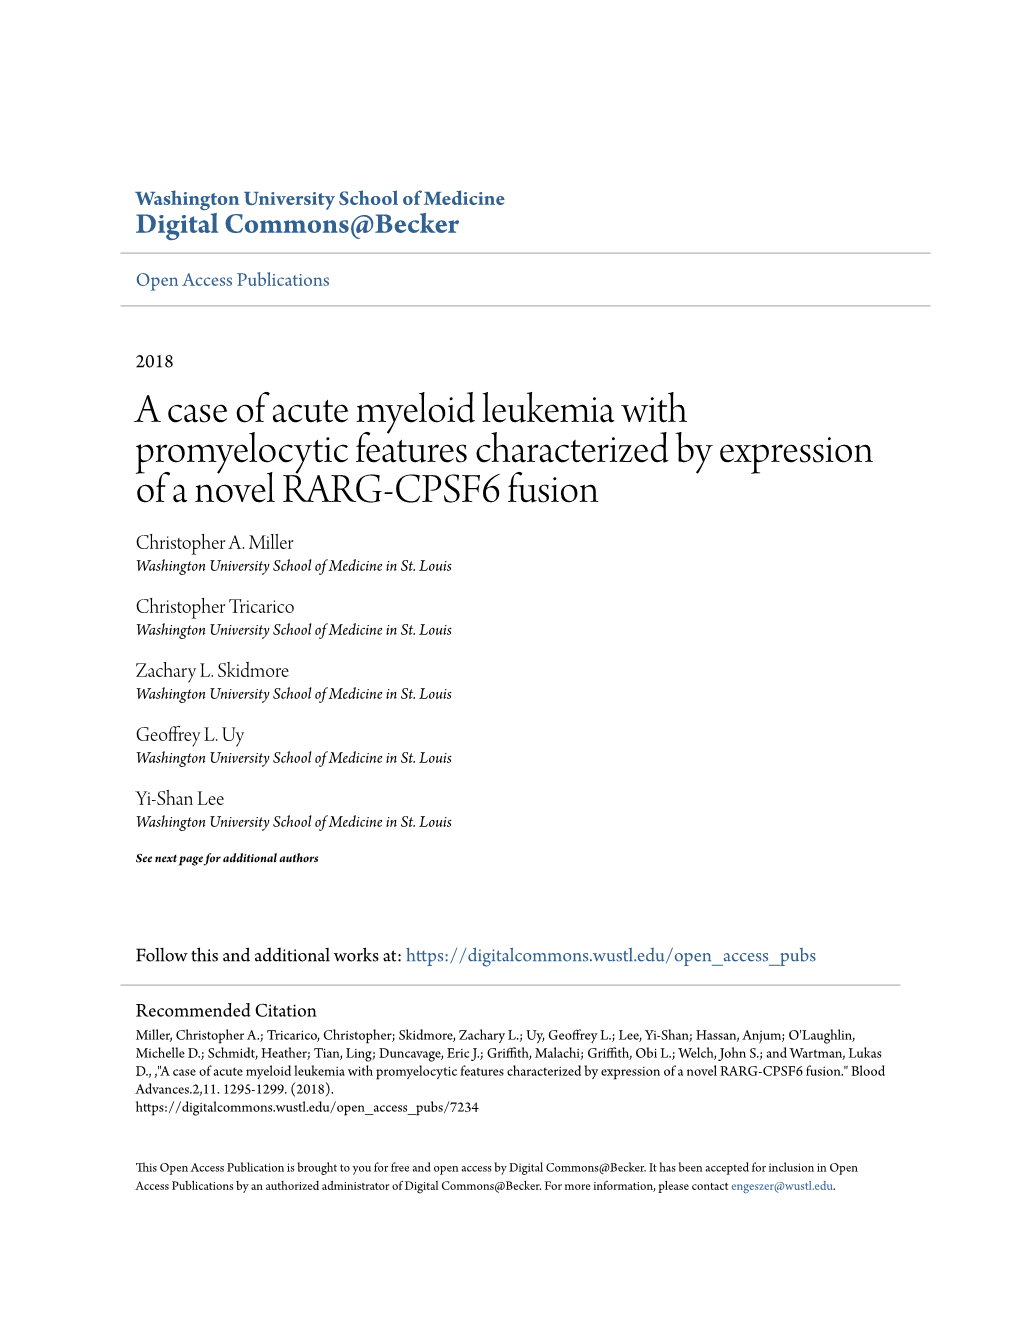 A Case of Acute Myeloid Leukemia with Promyelocytic Features Characterized by Expression of a Novel RARG-CPSF6 Fusion Christopher A